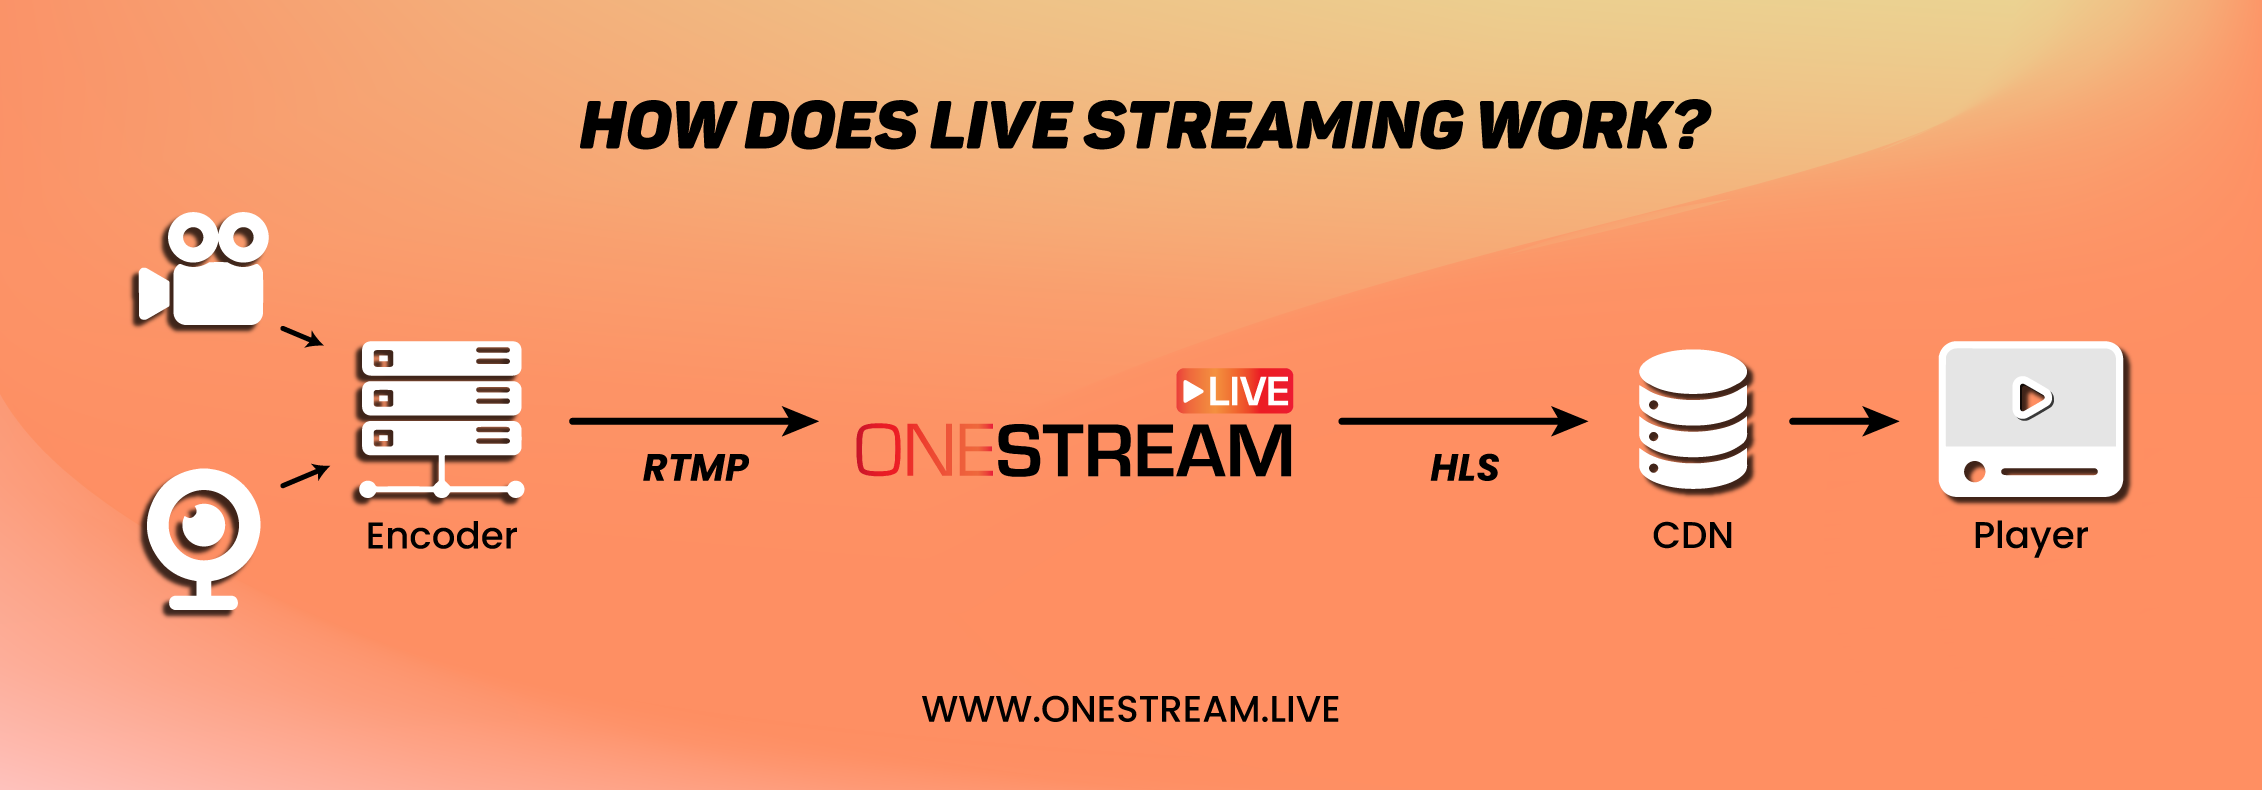 How Does Live Streaming Work